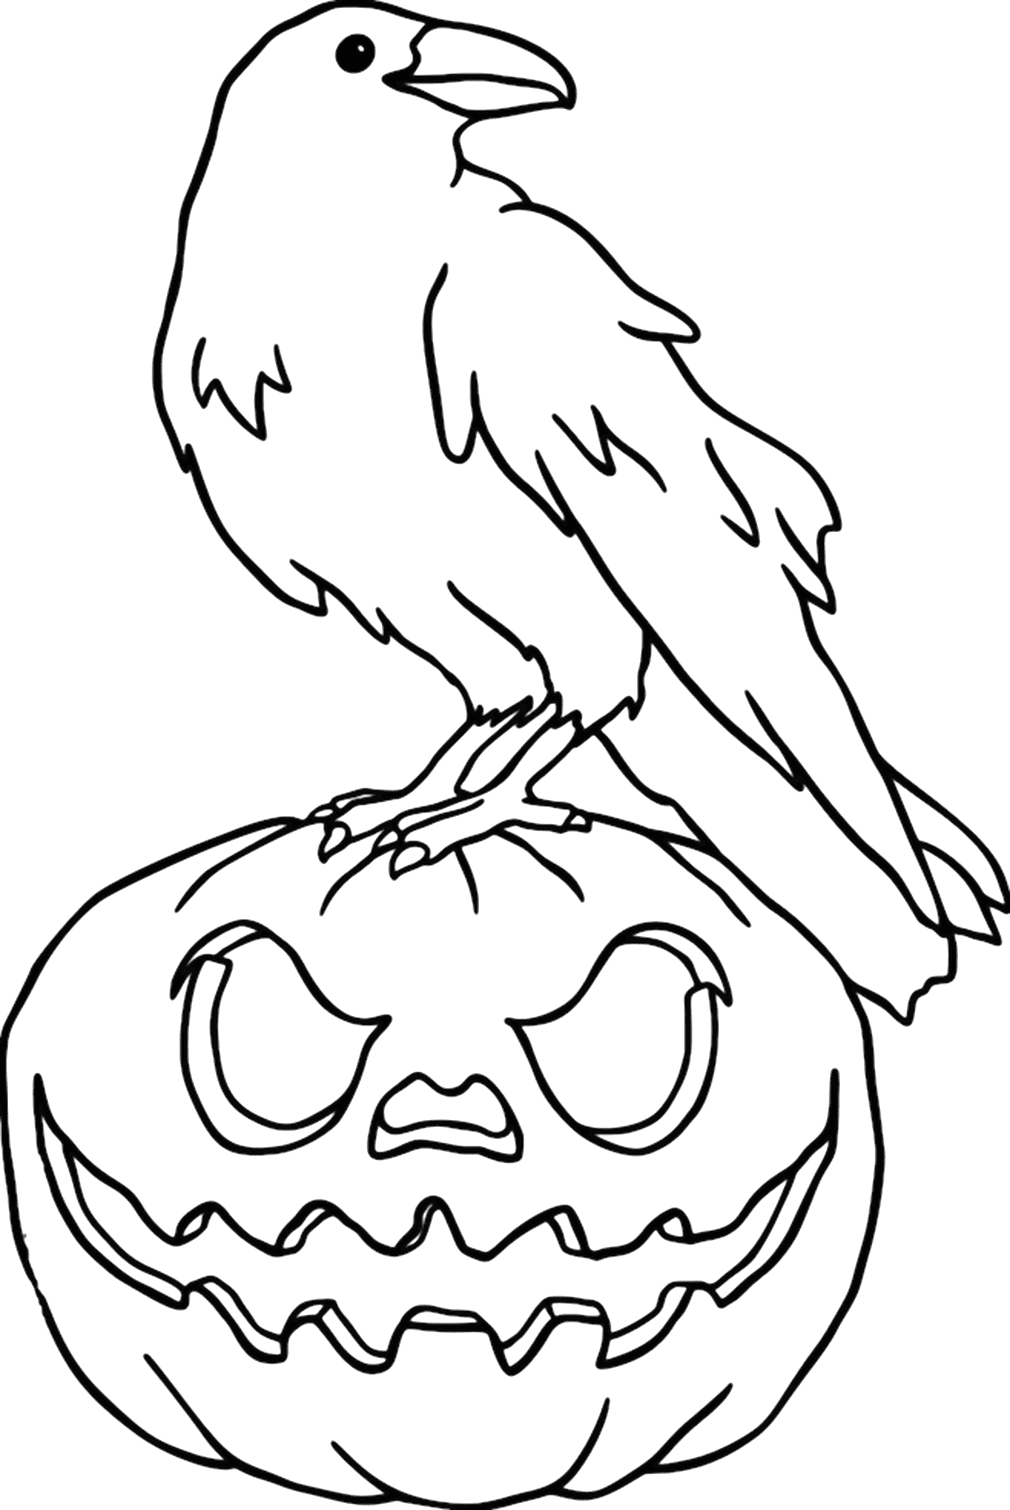 Crow On Pumpkin To Color from Crow